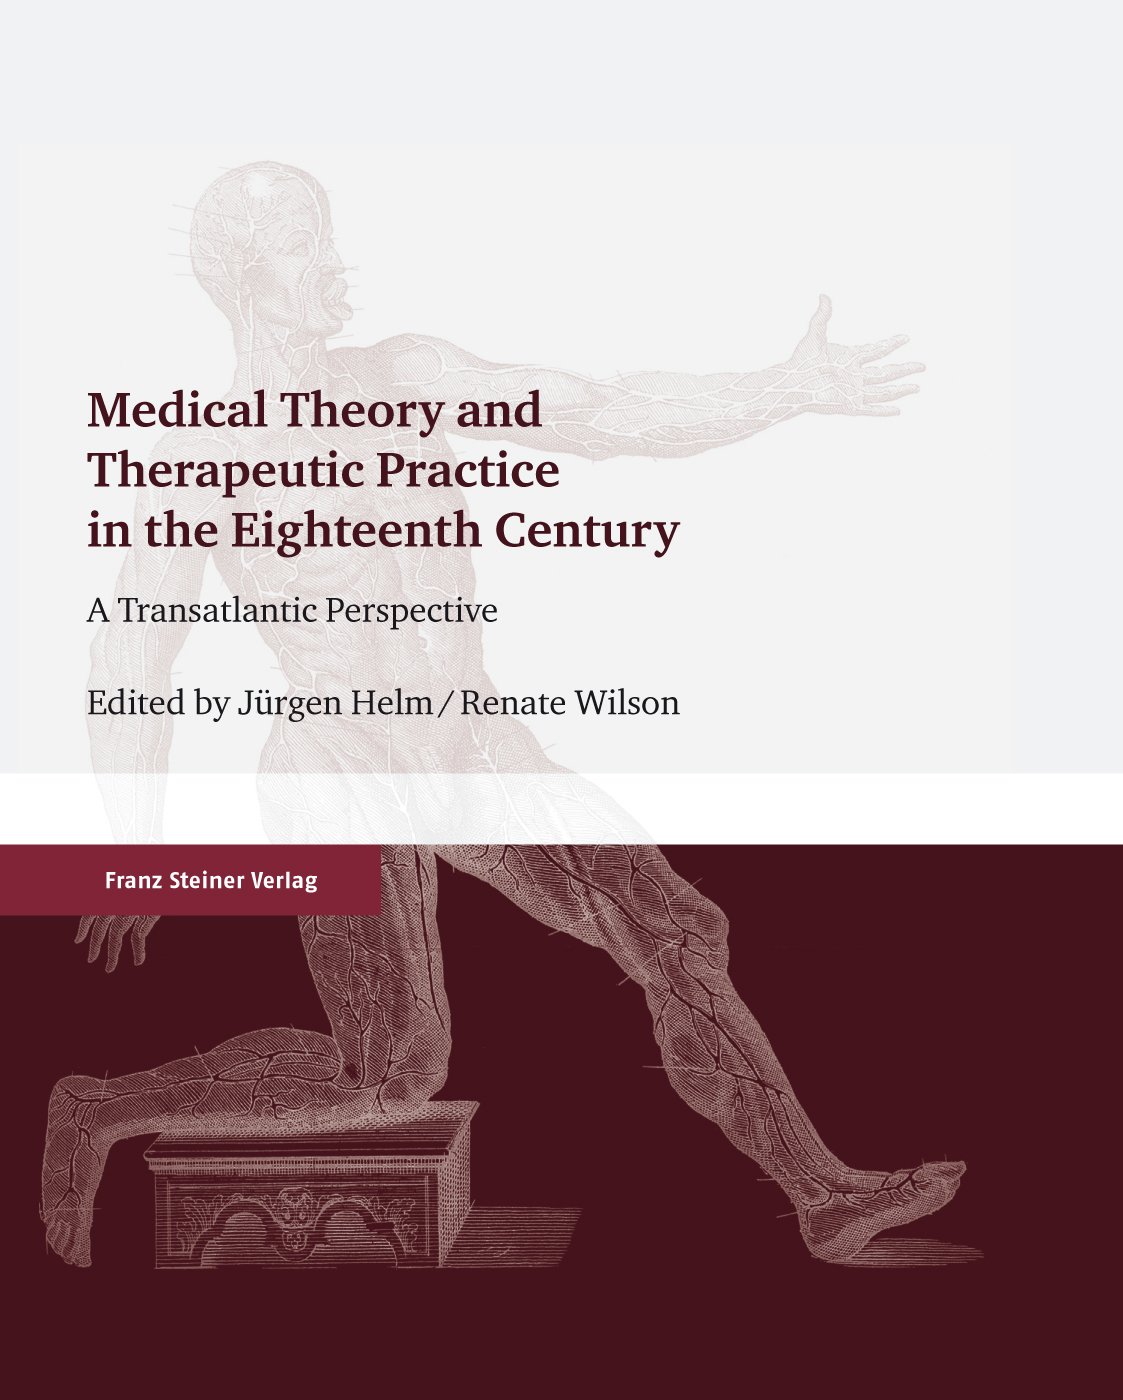 Medical Theory and Therapeutic Practice in the Eighteenth Century